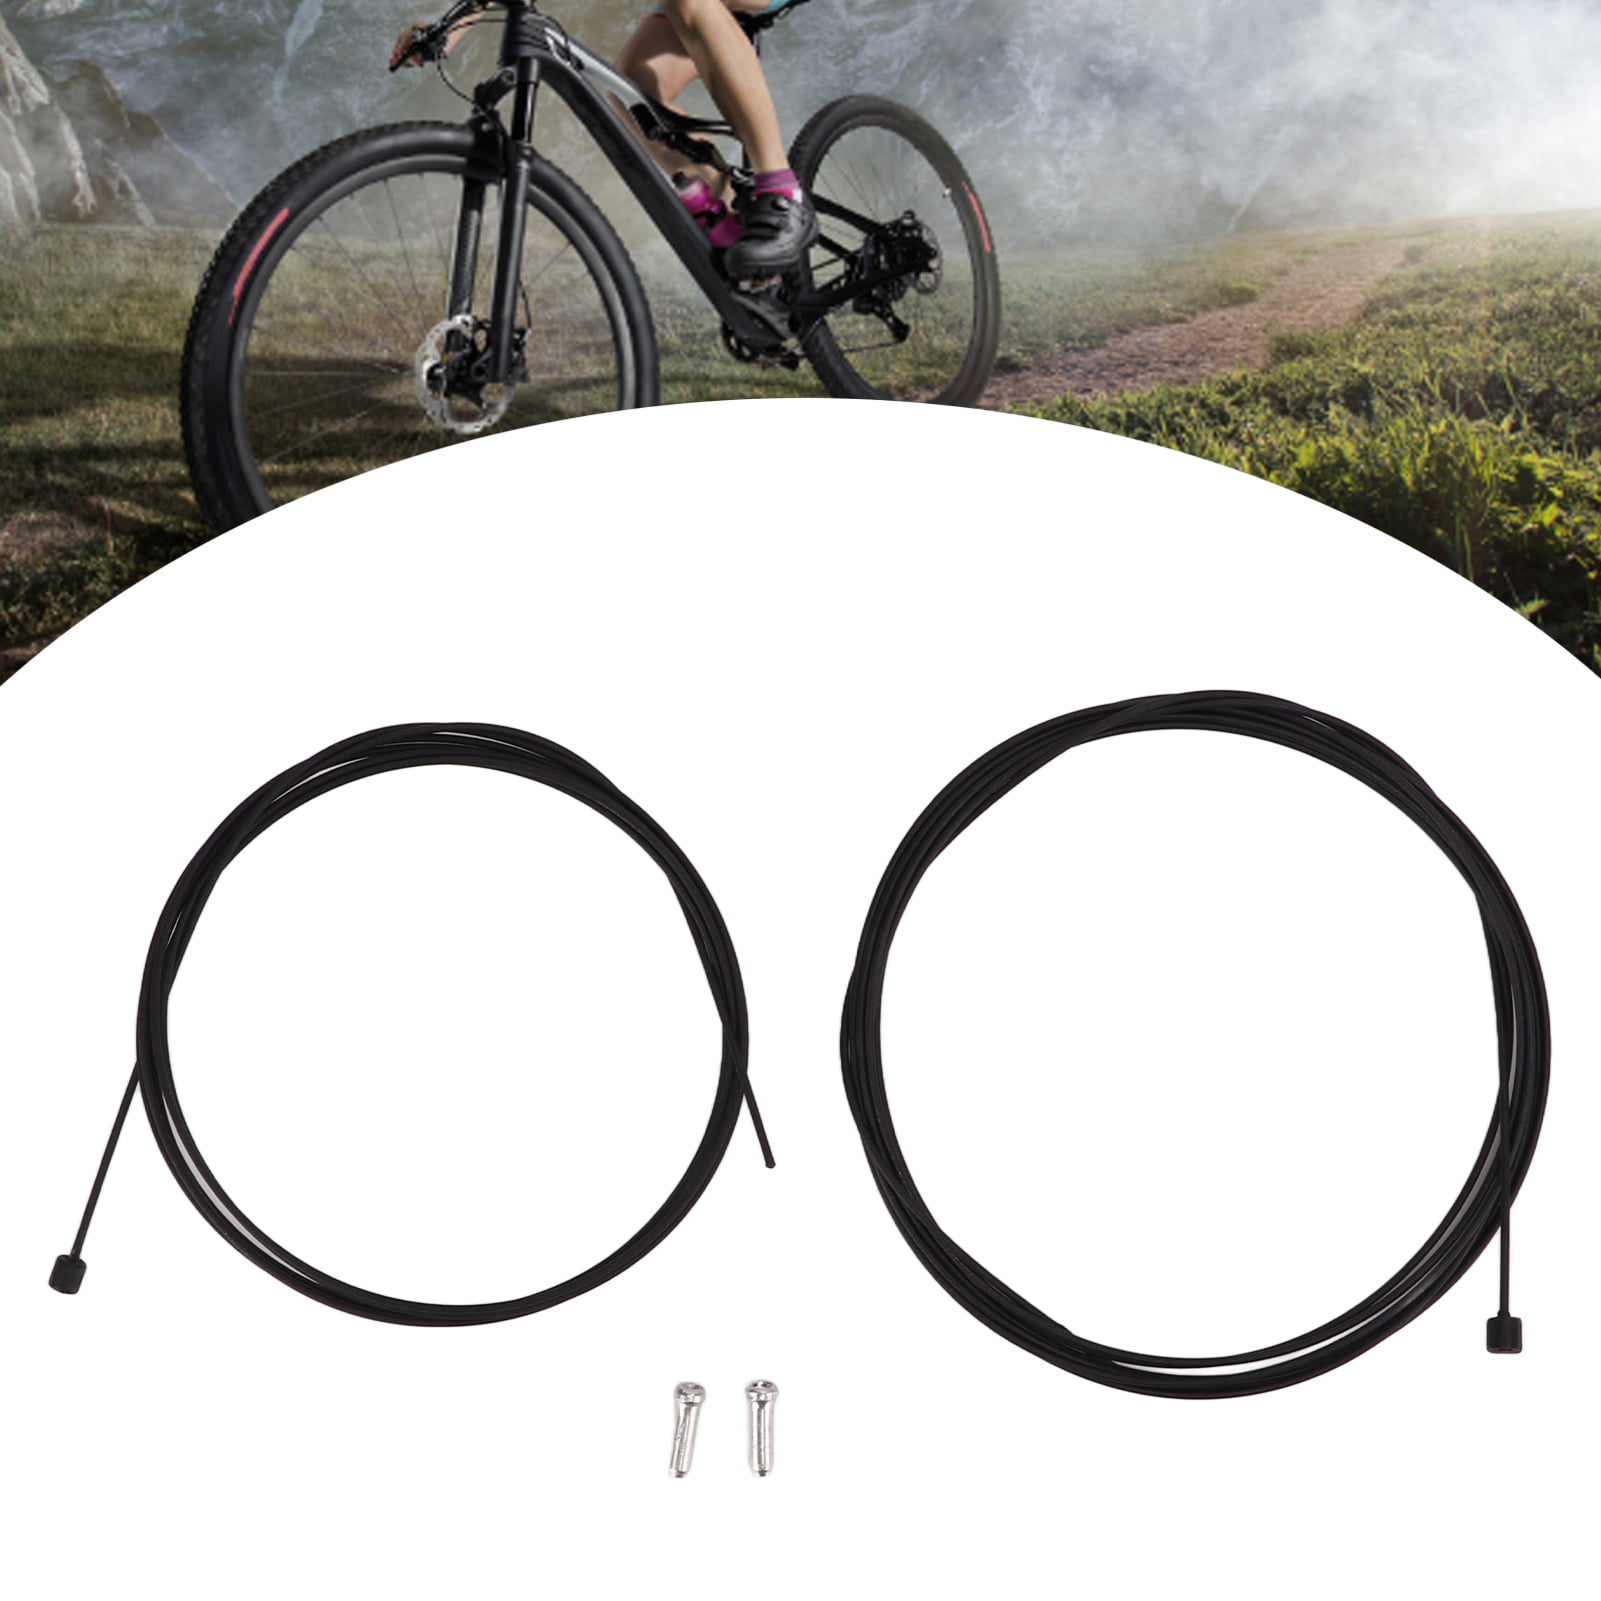 Bike Brake Cable Mountain bike TPFE Core Cycling Front/rear Durable High Quality 